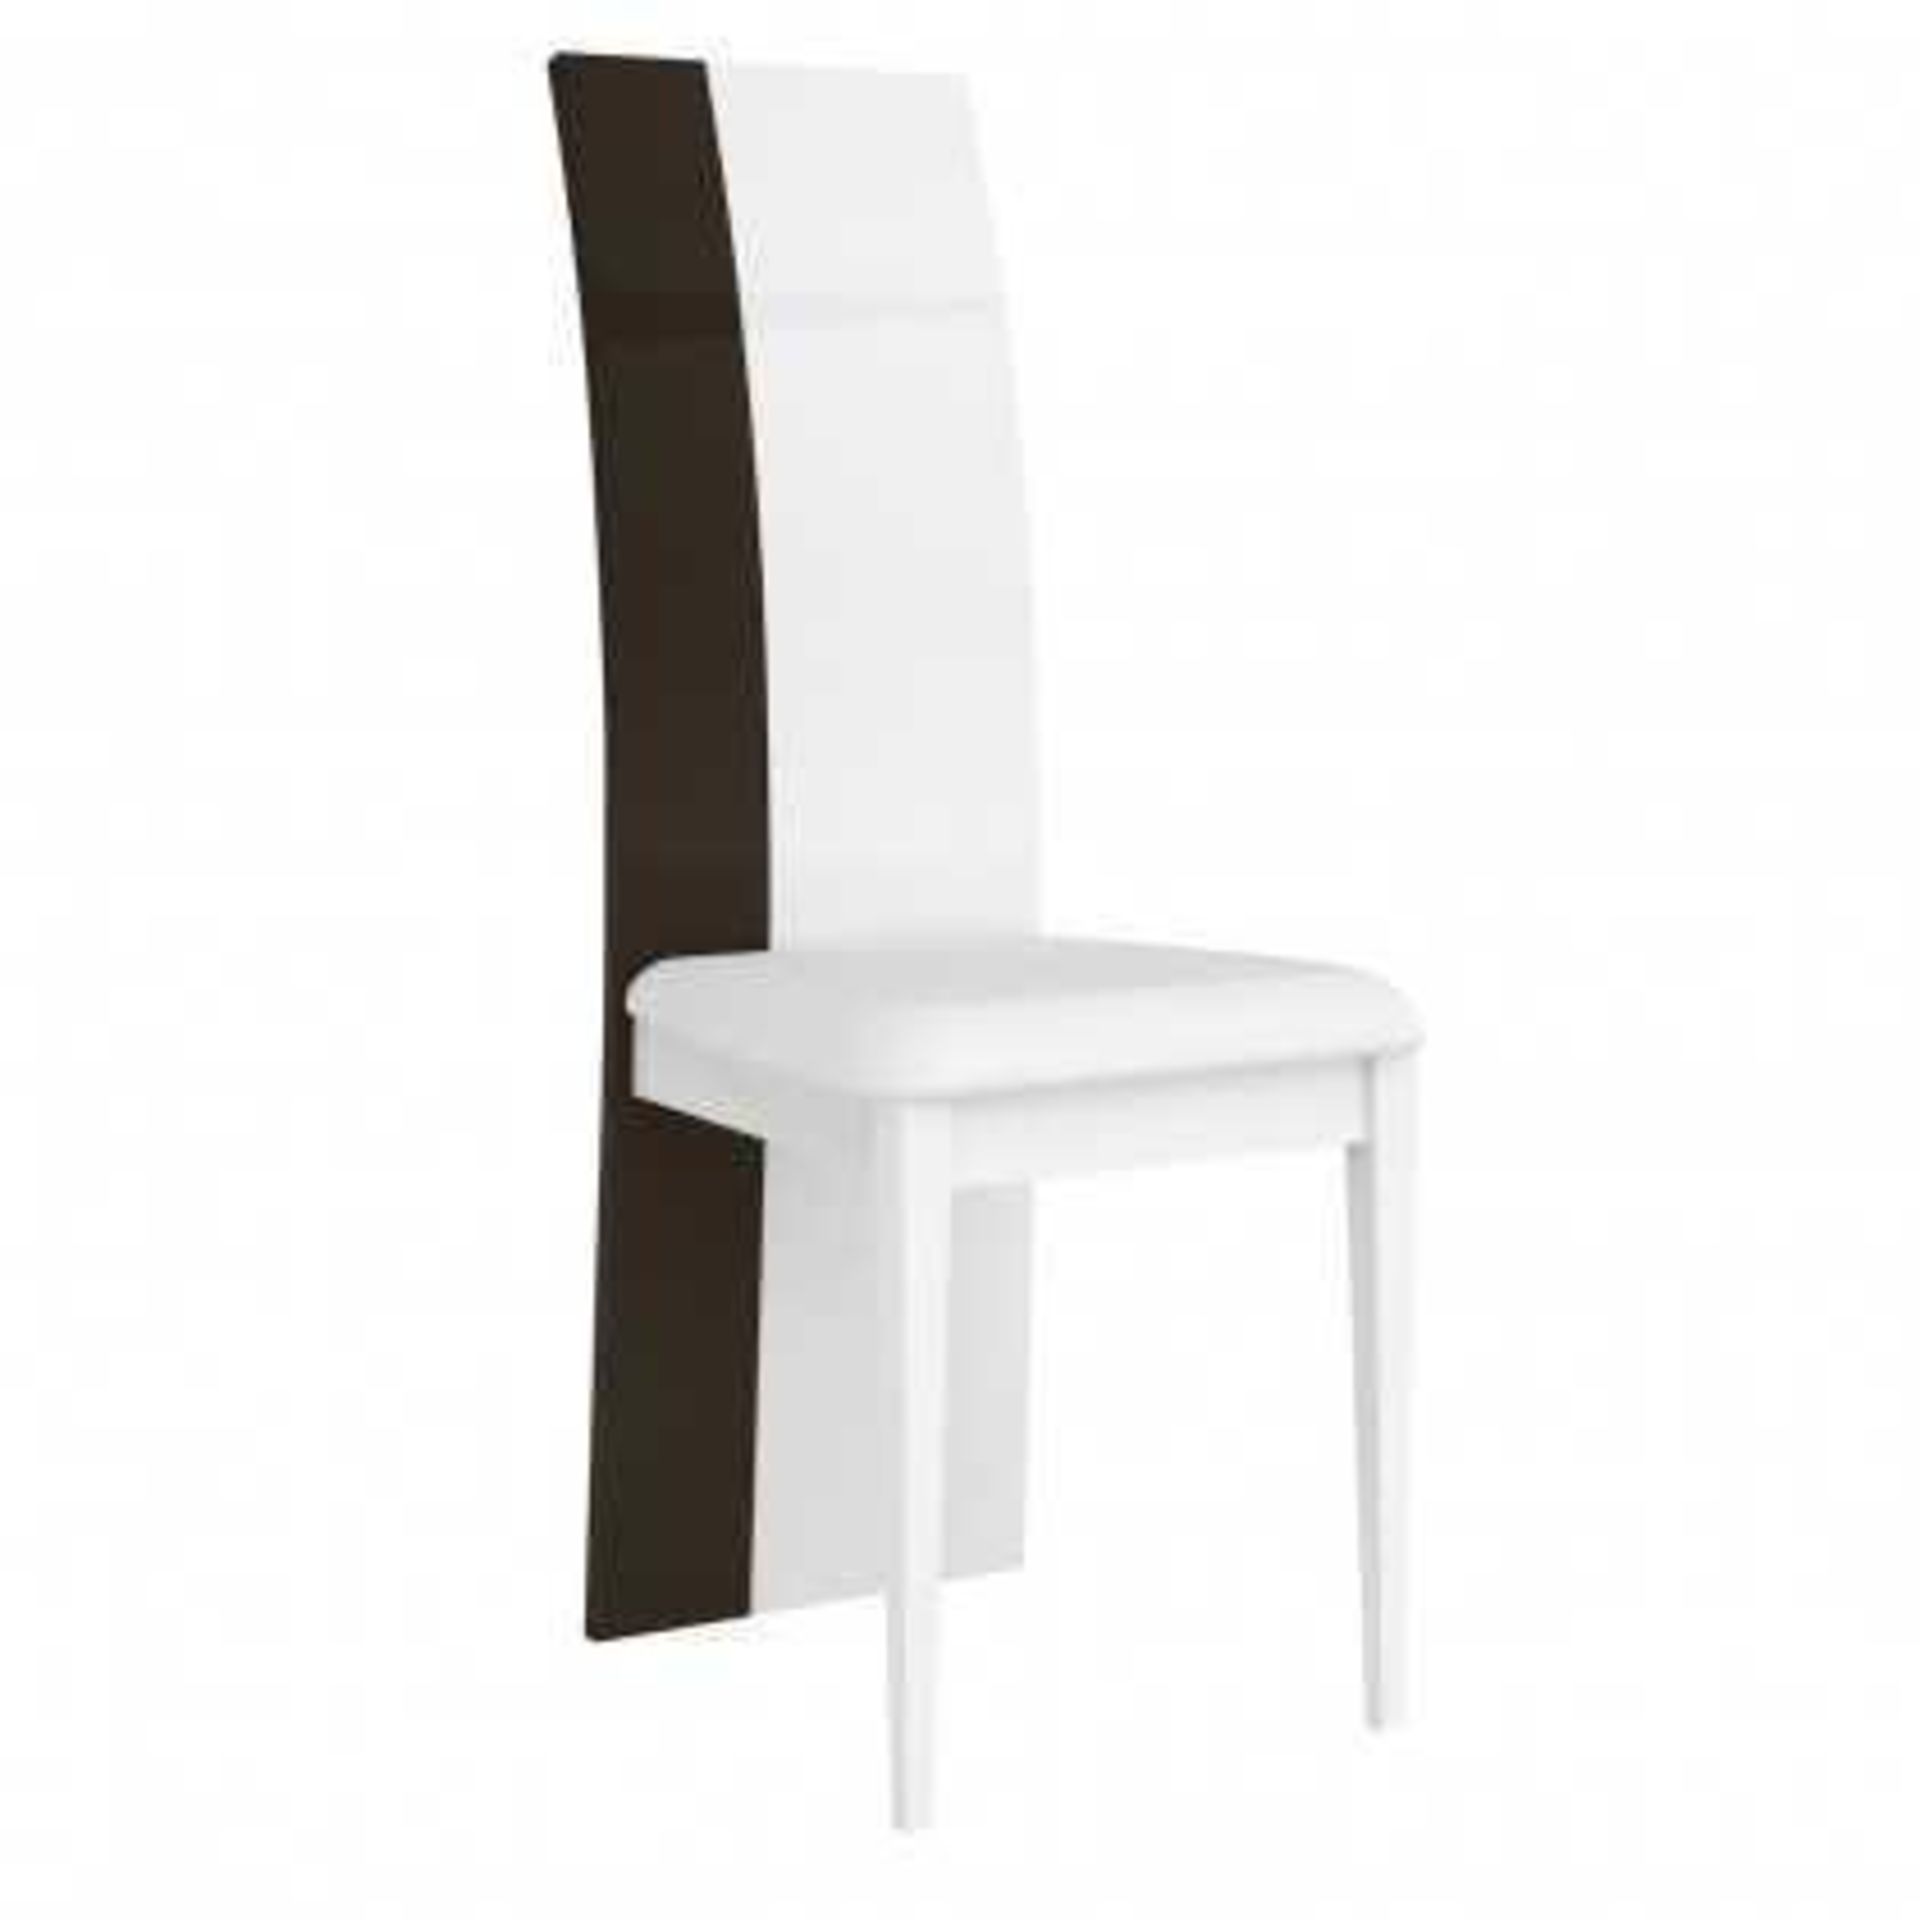 RRP £200 - Boxed New 2 'Karat' Dining Chairs